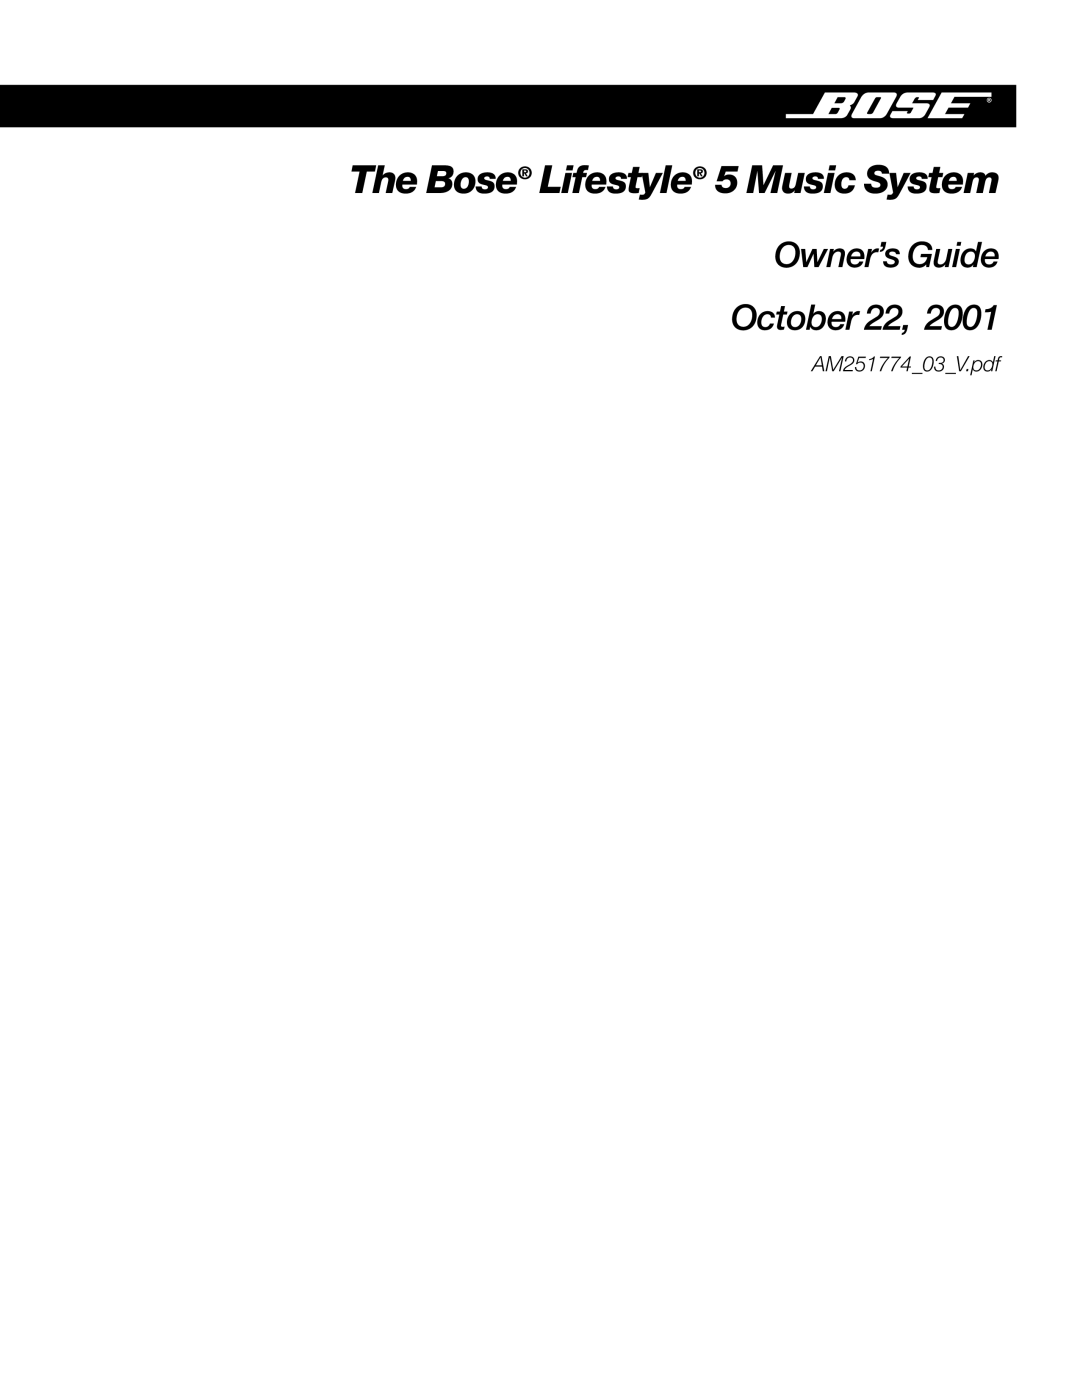 Bose manual The Bose Lifestyle 5 Music System, Owner’s Guide Decemb er 